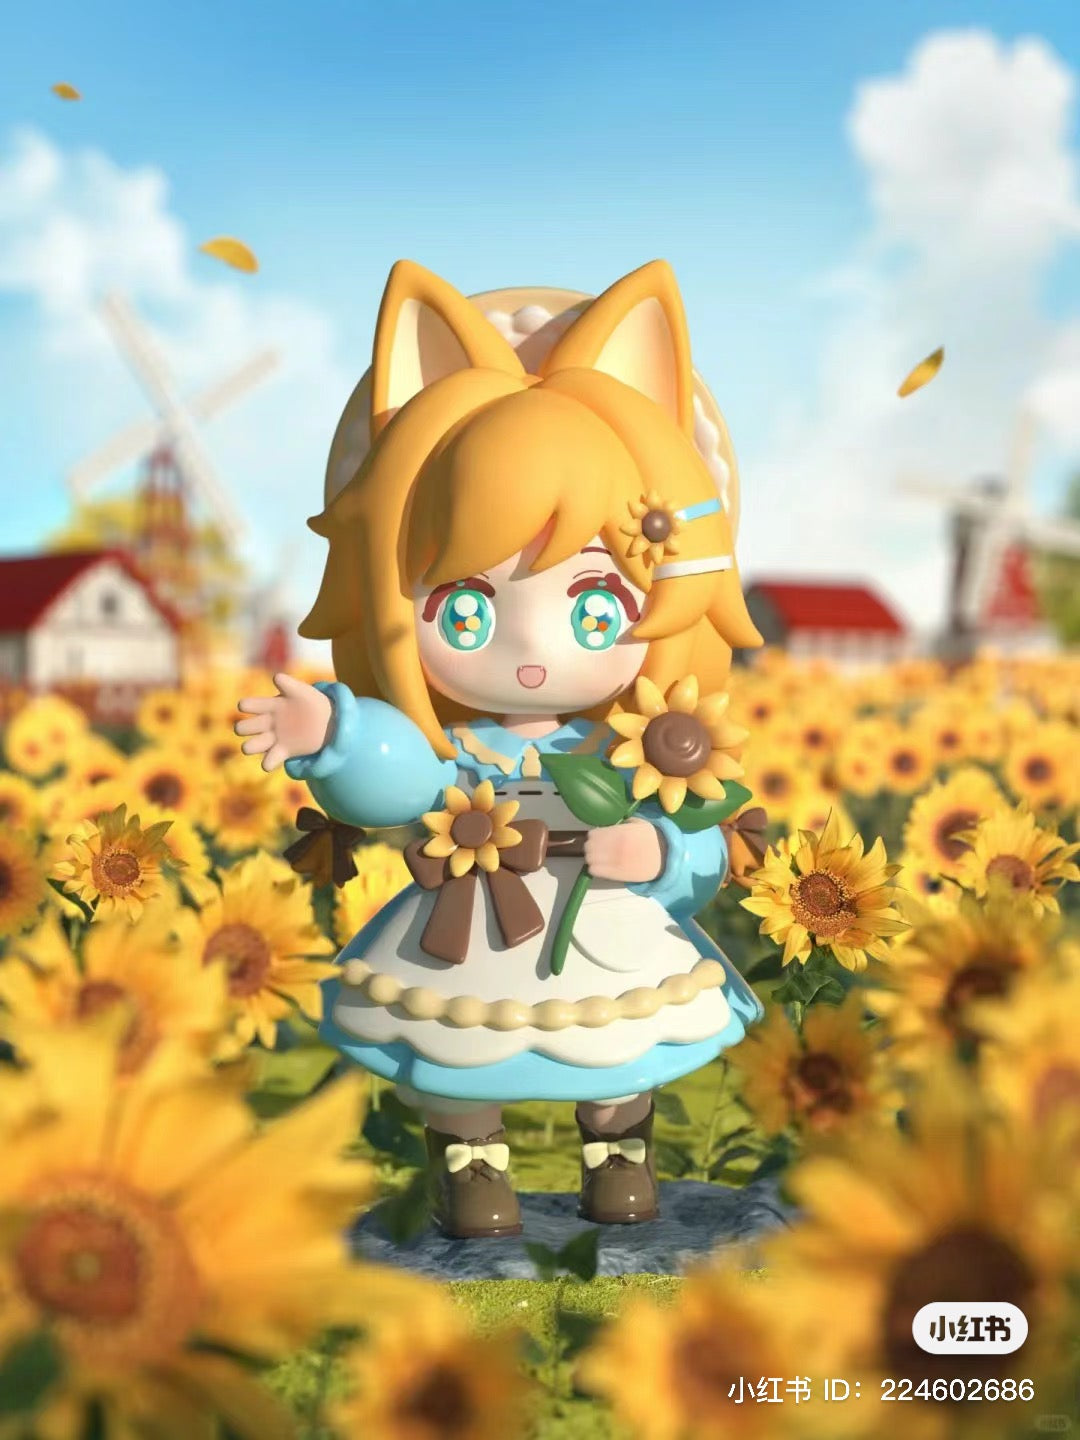 NINIZEE The Secret Realm of Flowers Blind Box Series - Preorder